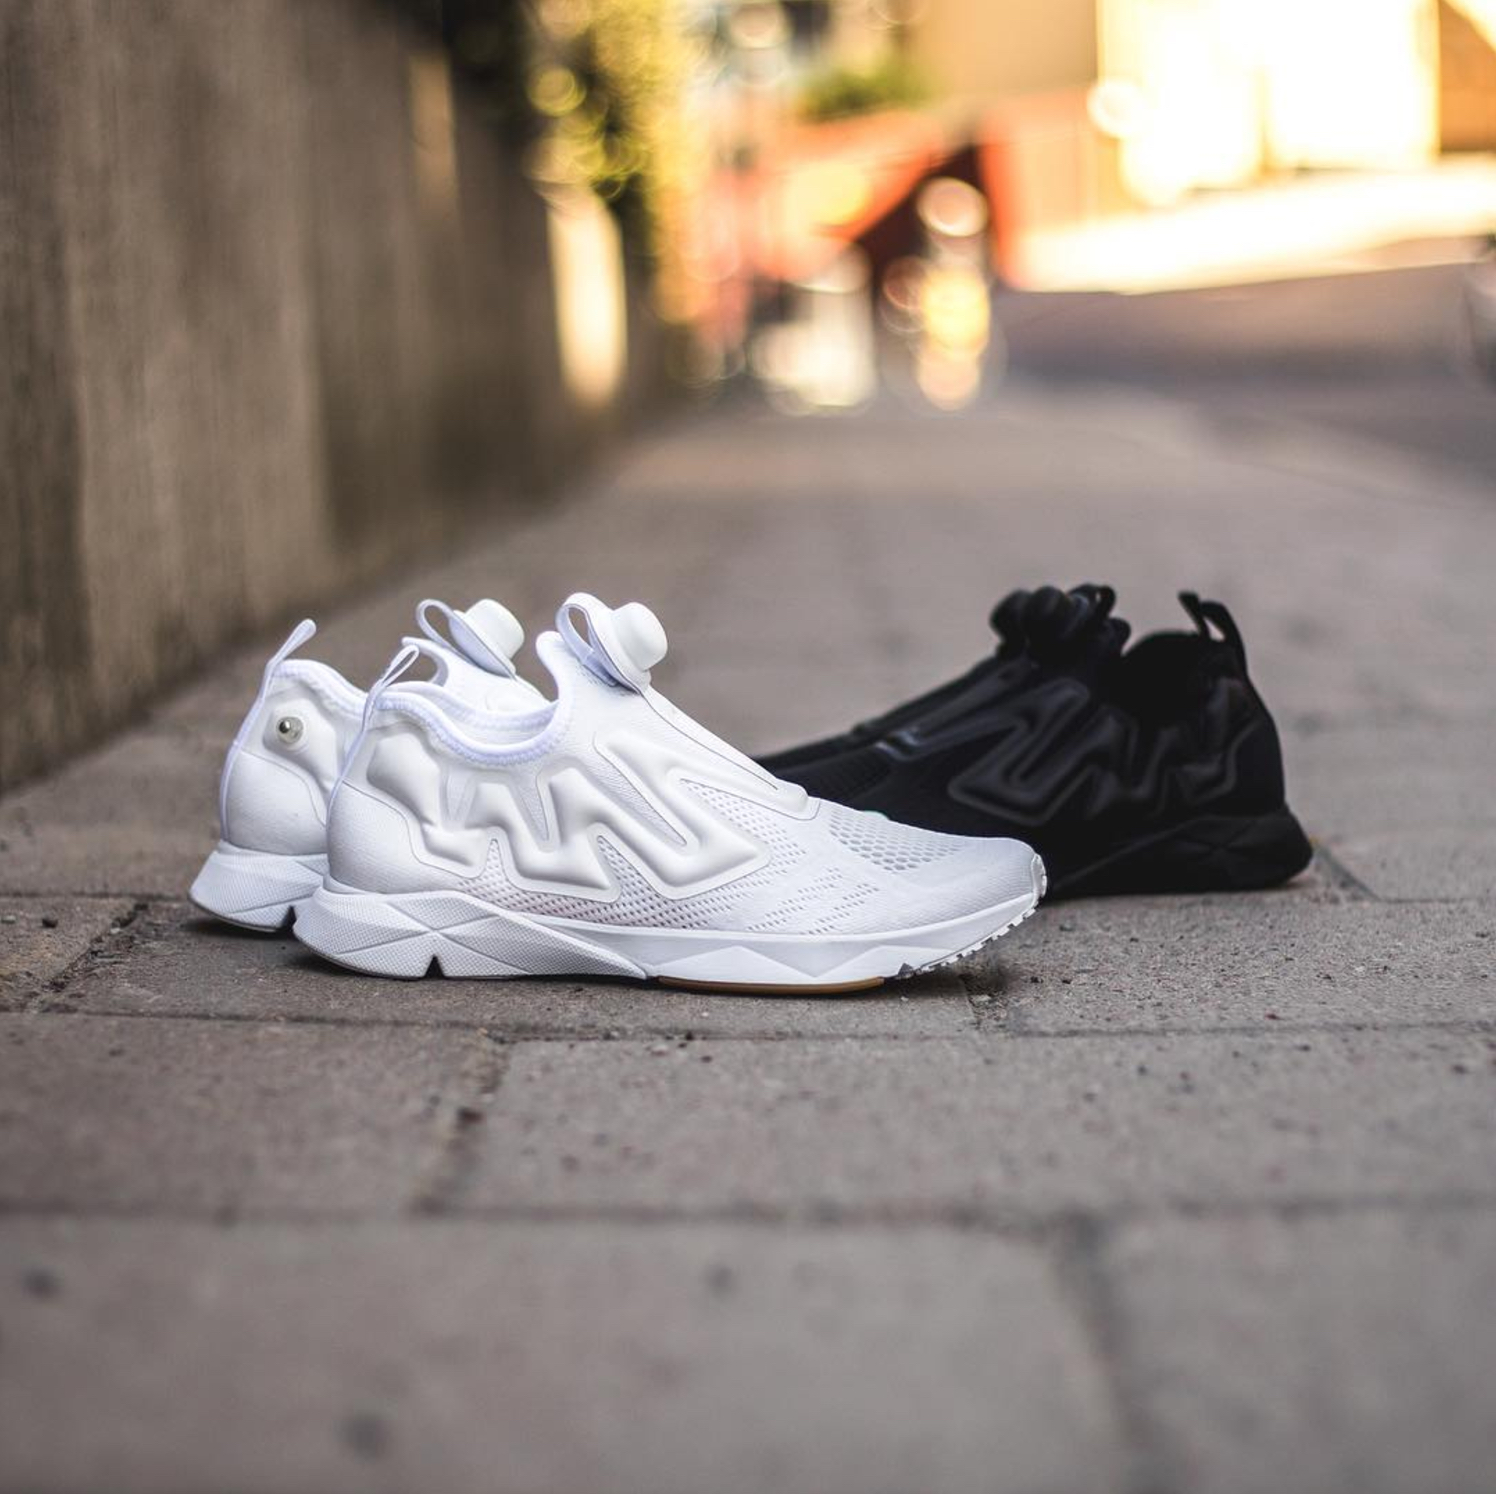 The Reebok Pump Supreme Goes Monochromatic and Gets Gum - WearTesters